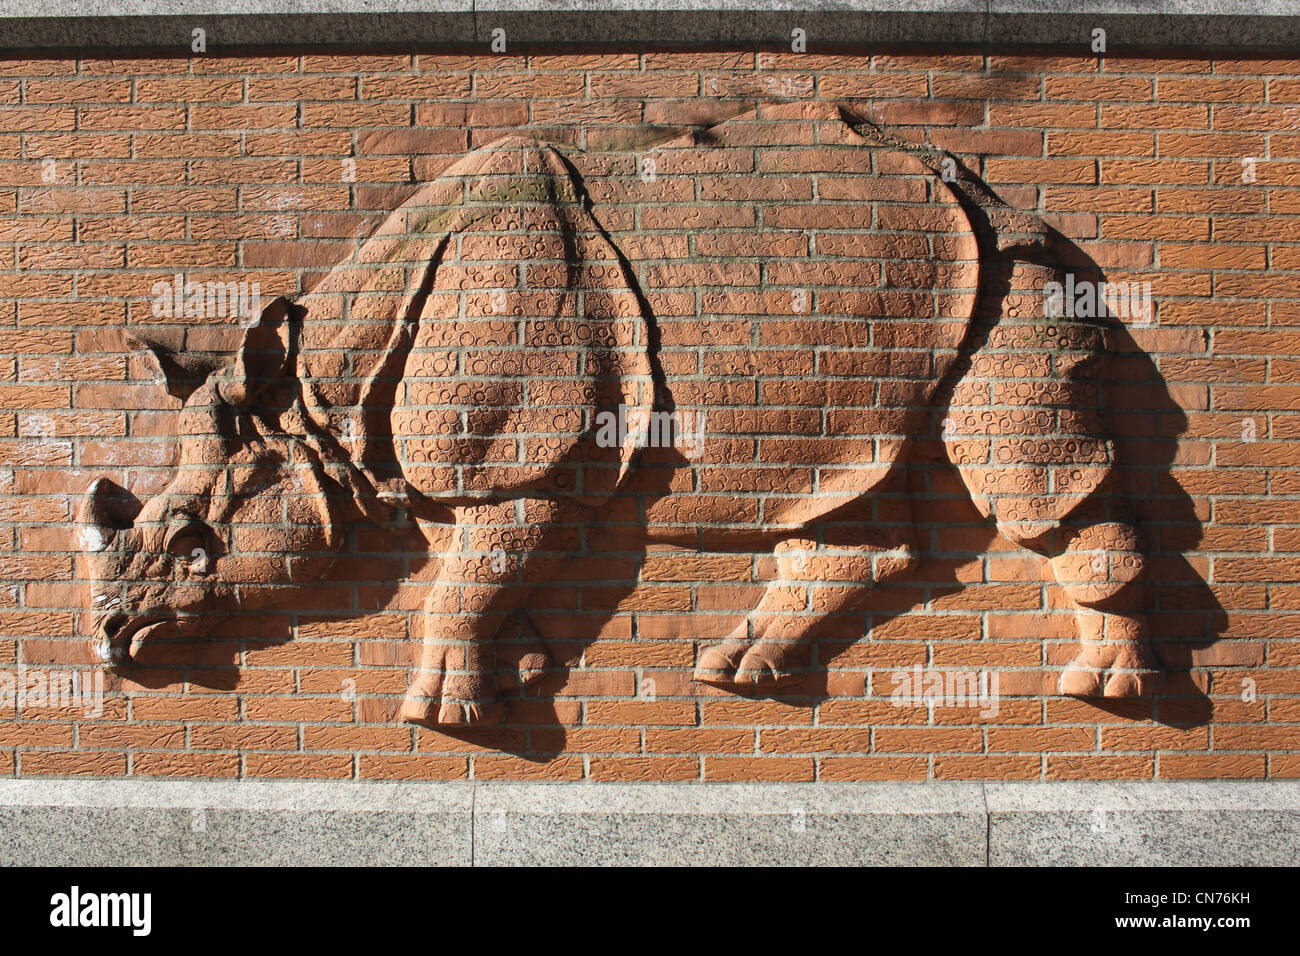 Brick relief sculpture of a rhinoceros on the outside wall of the Berlin Zoo Stock Photo